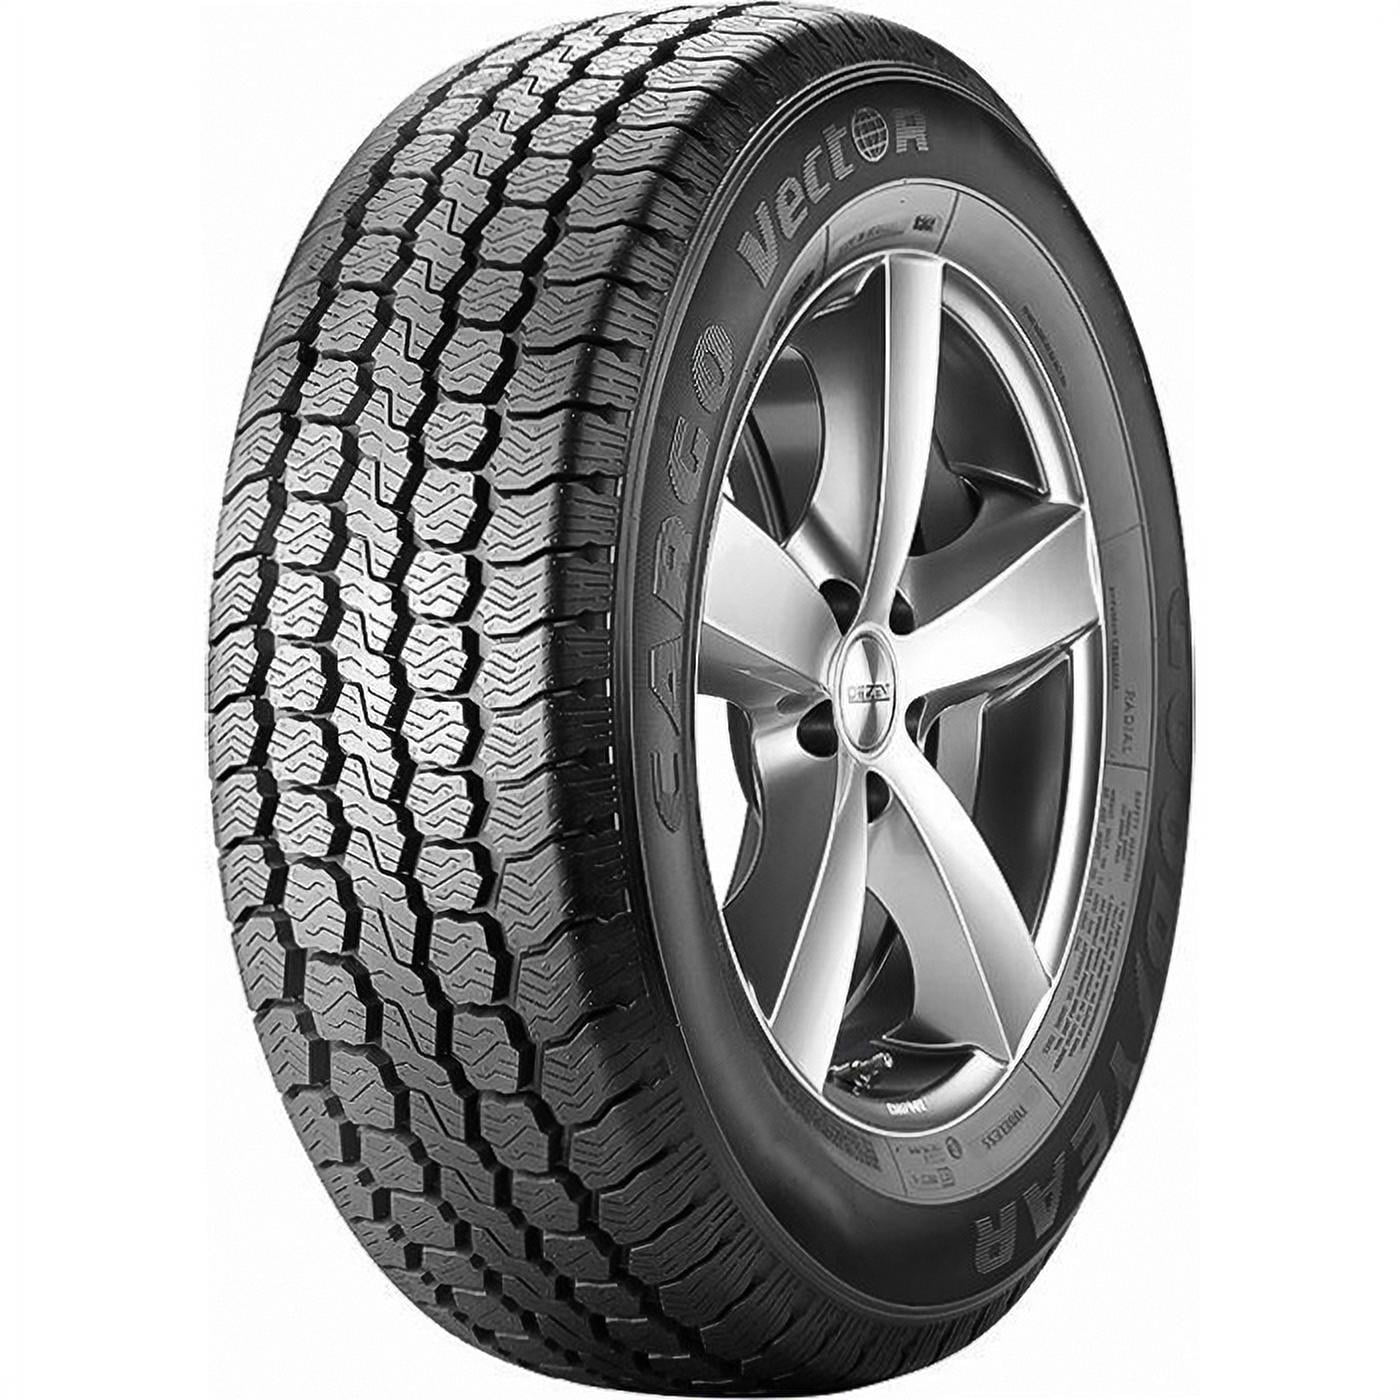 Tire Goodyear Cargo Vector 285/65R16 Commercial D 8 Load Ply